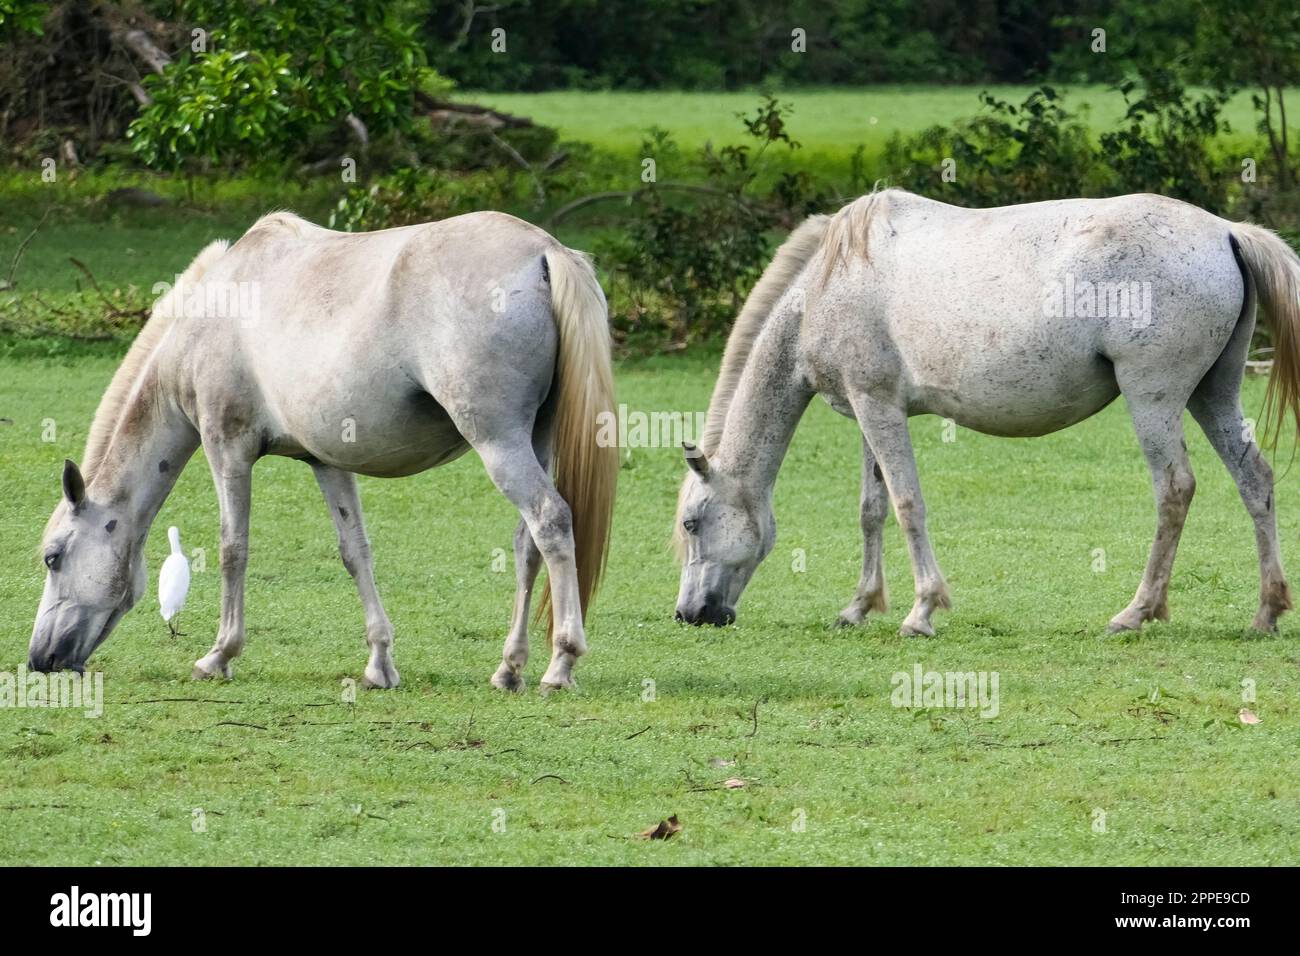 Two Pantanal horses grazing on a lush green meadow in the Pantanal Wetlands, Mato Grosso, Brazil Stock Photo